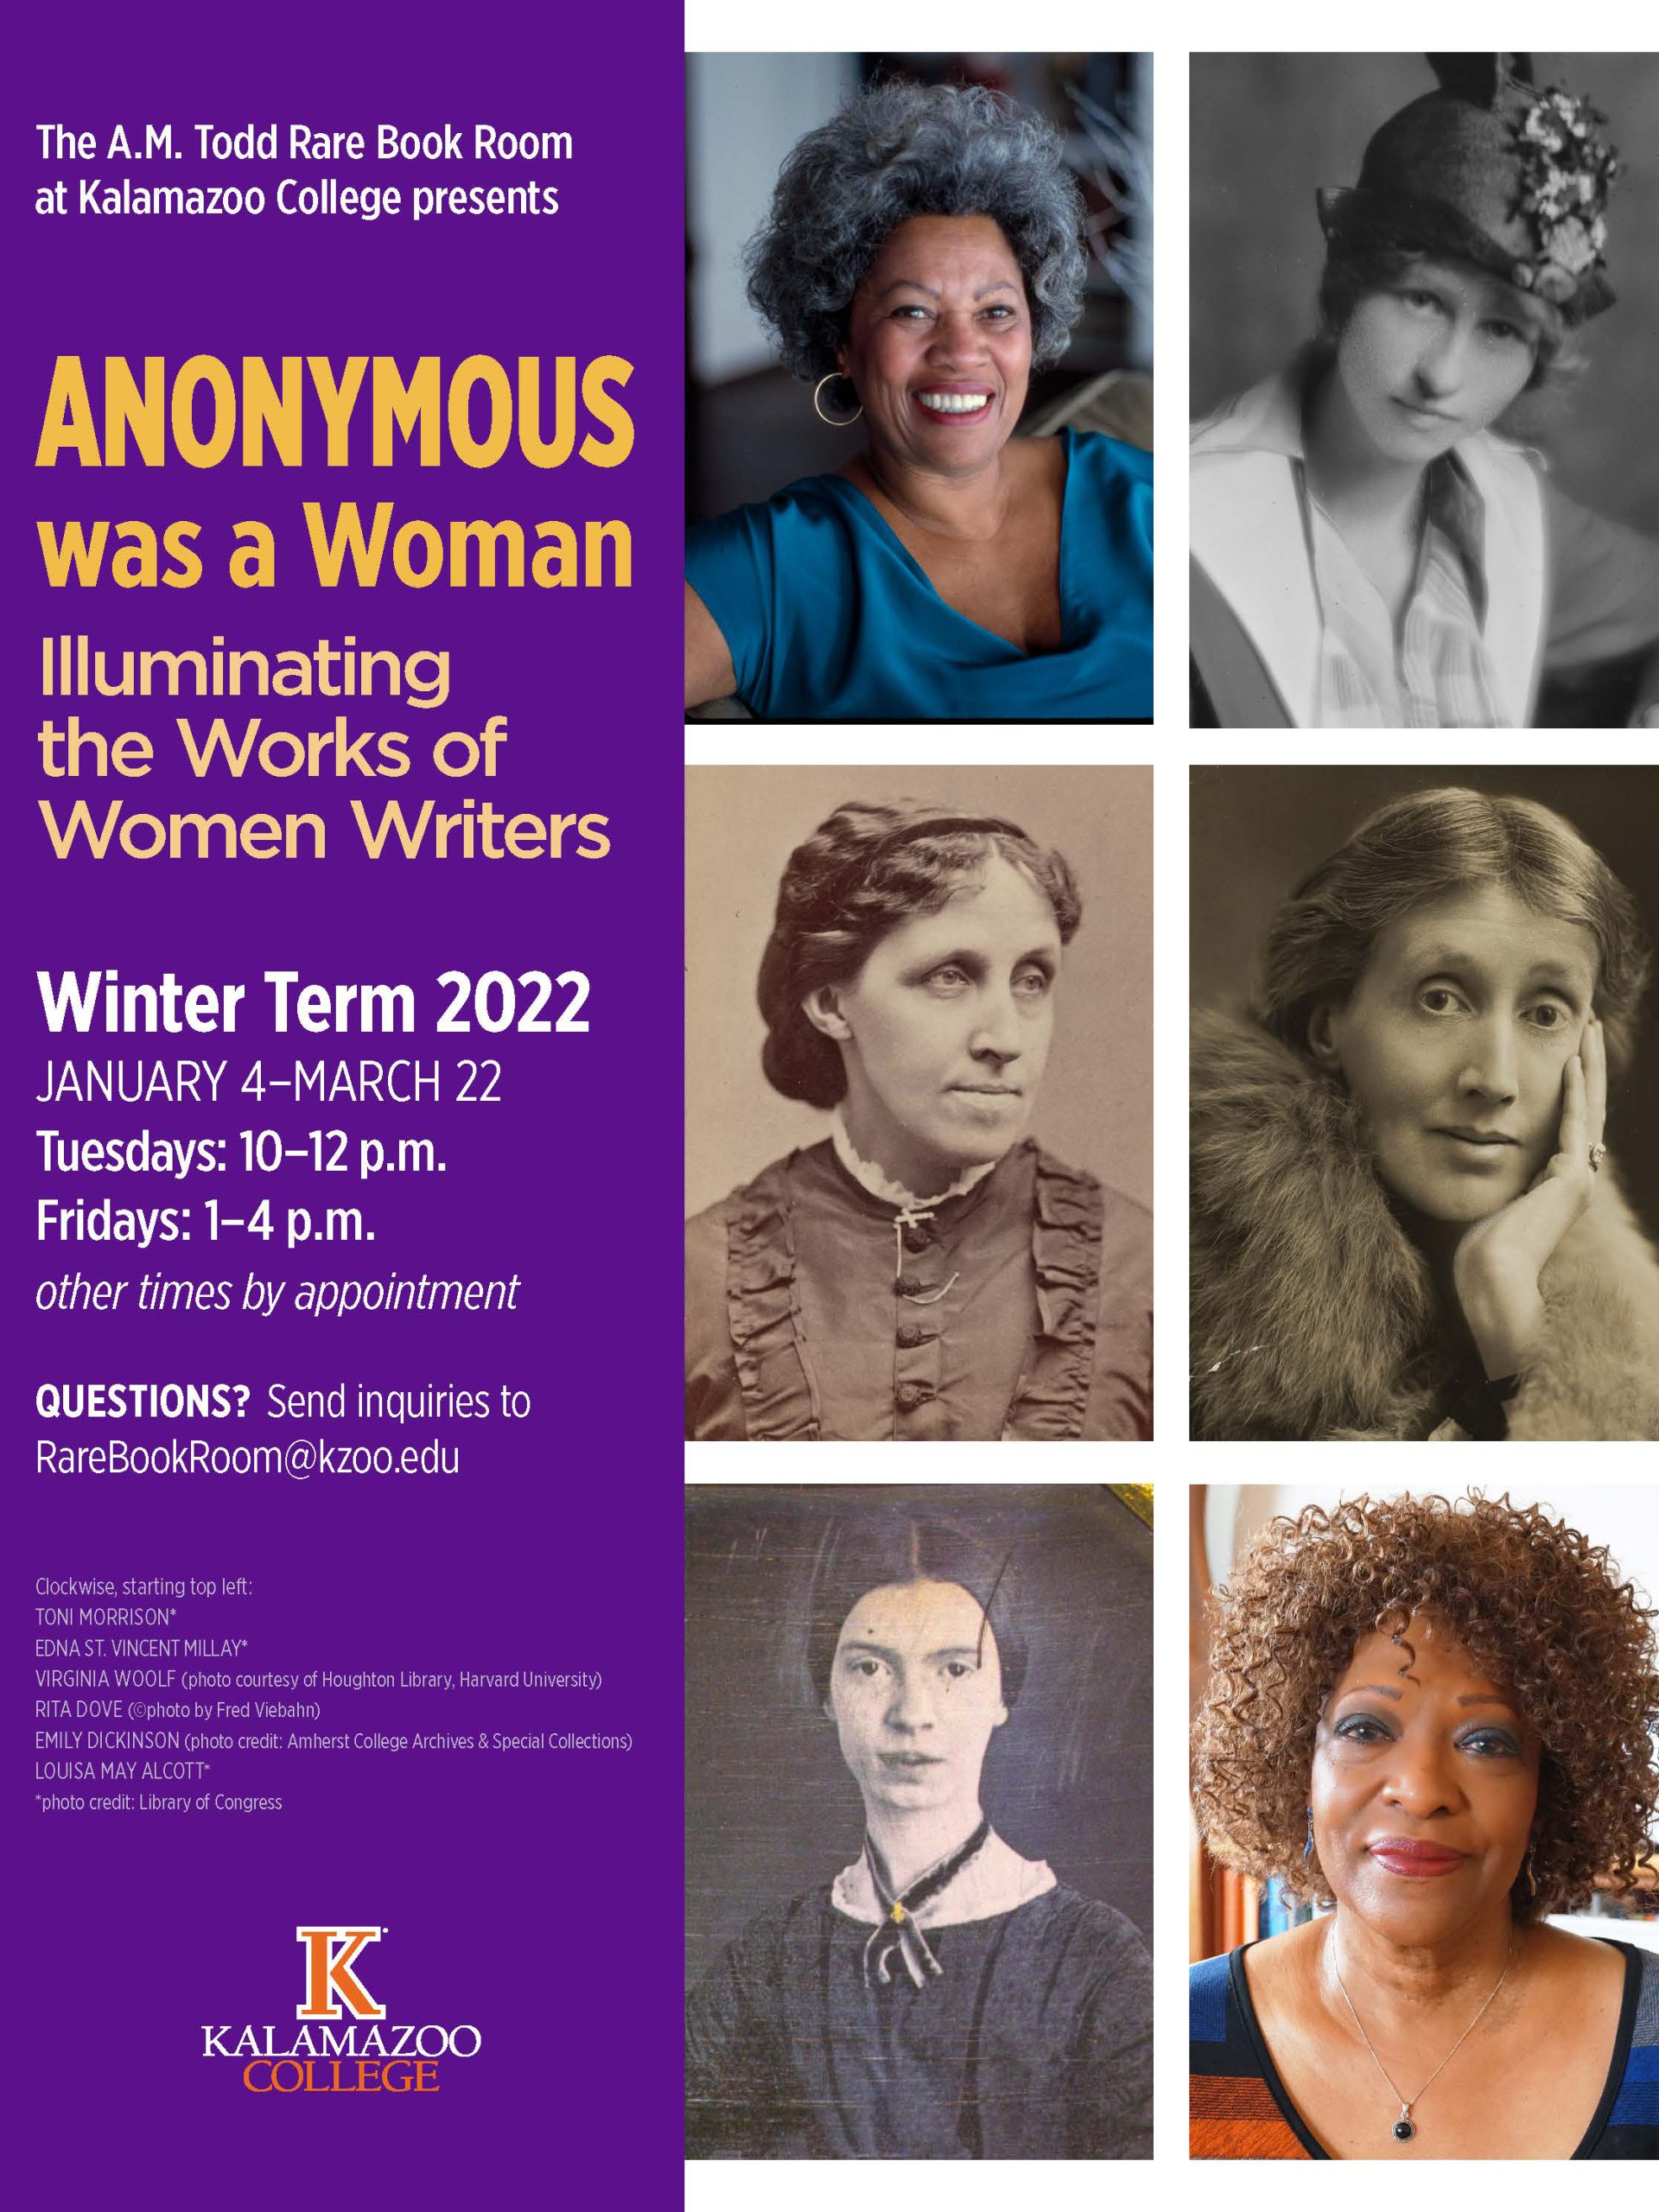 Anonymous was a Woman exhibit poster featuring images of Toni Morrison, Edna St. Vincent Millay, Louisa May Alcott, Virginia Woolf, Emily Dickinson, and RIta Dove